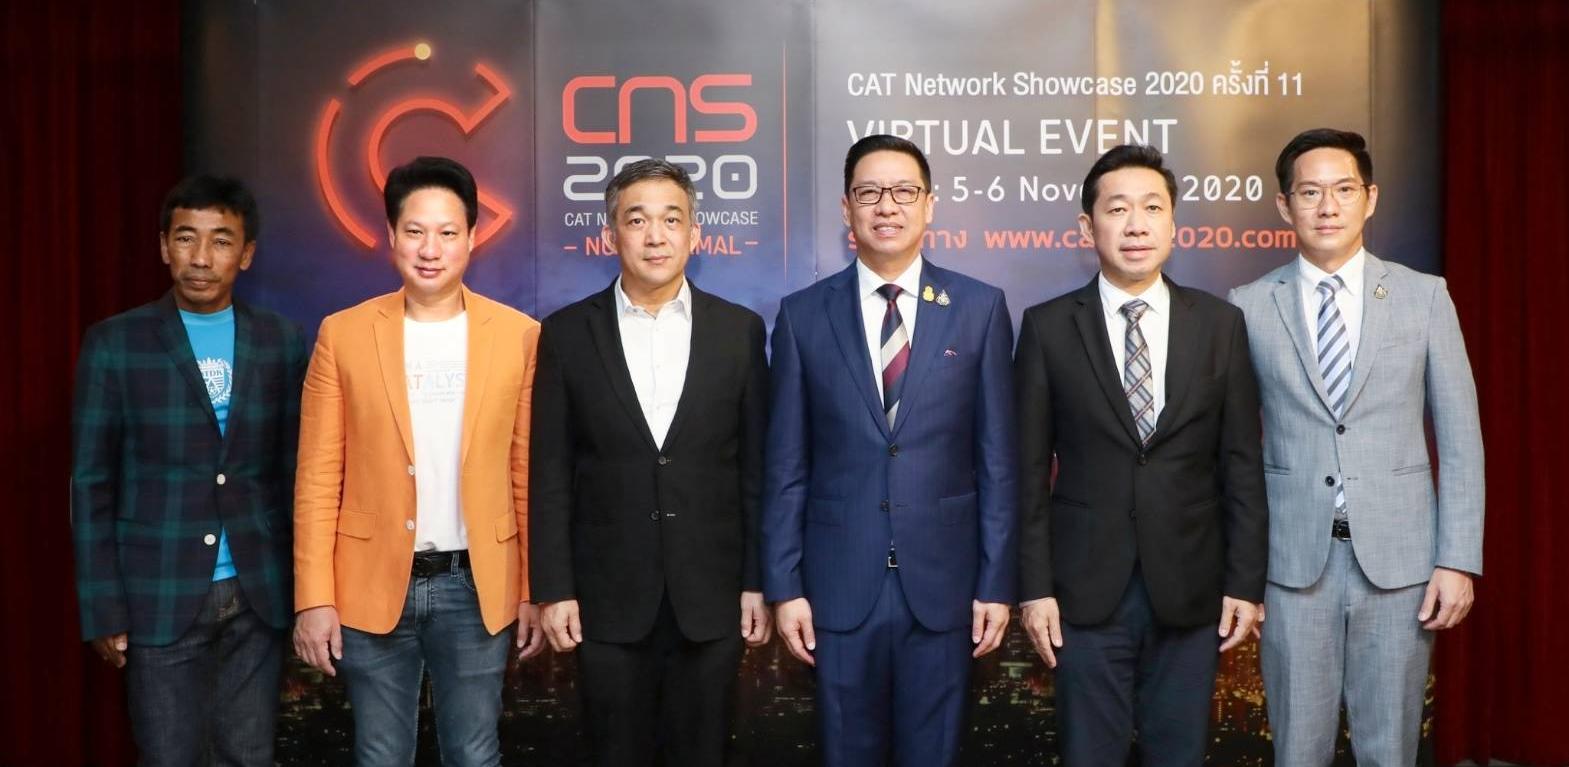 CAT NETWORK SHOWCASE 2020 HELD VIRTUALLY FOR THE FIRST TIME  SHOWCASE NOW NORMAL TECHONOLOGY  TO STEP INTO THE COMPLETE DIGITAL TRANSFORMATION ERA